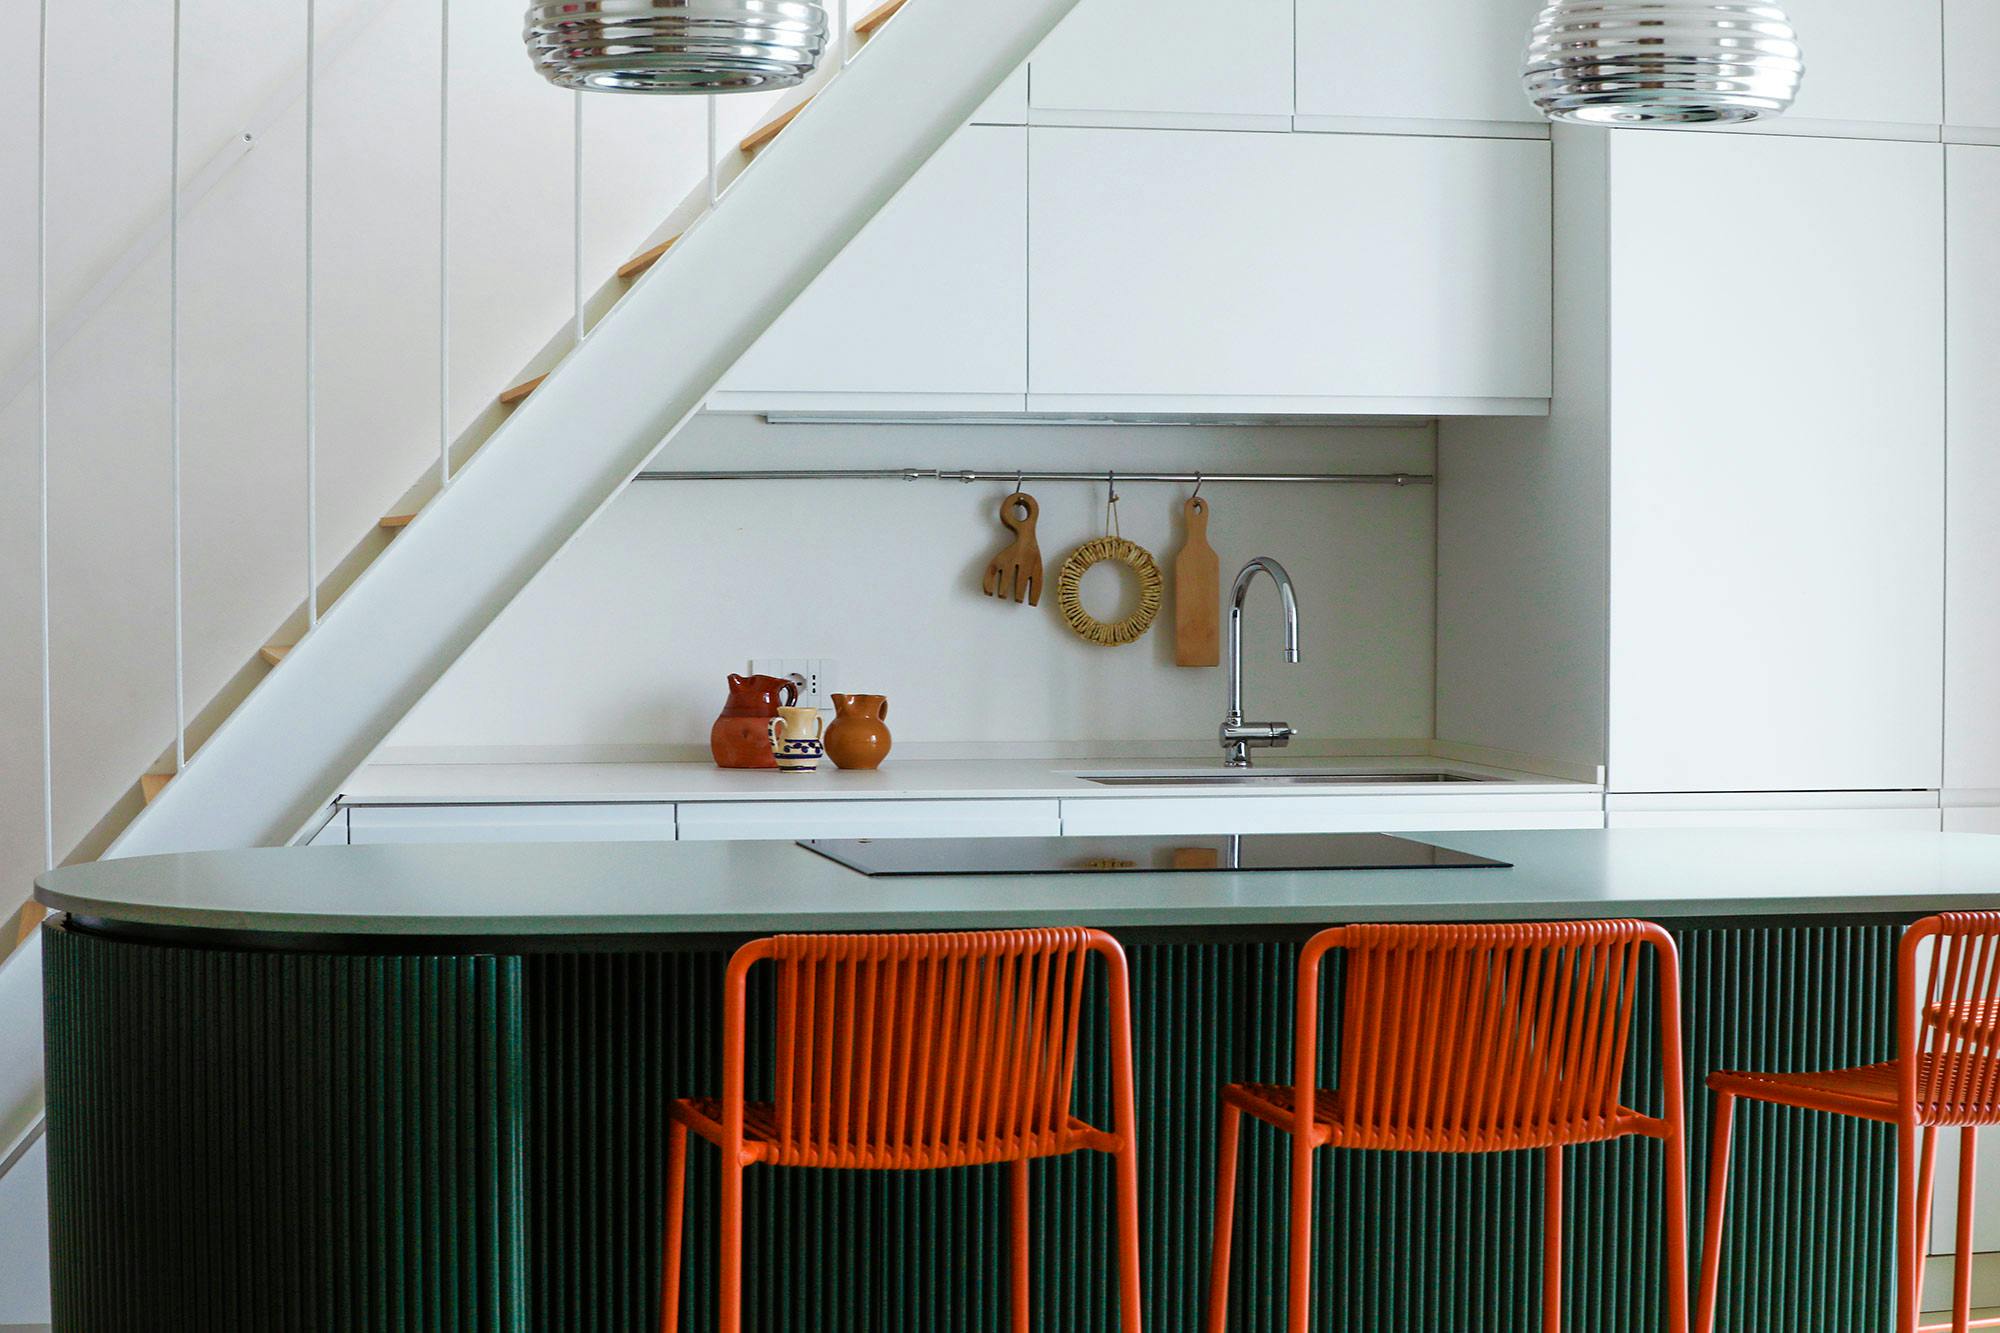 Numéro d'image 32 de la section actuelle de {{A functional kitchen under the stairs to make the most of space without compromising on design}} de Cosentino France